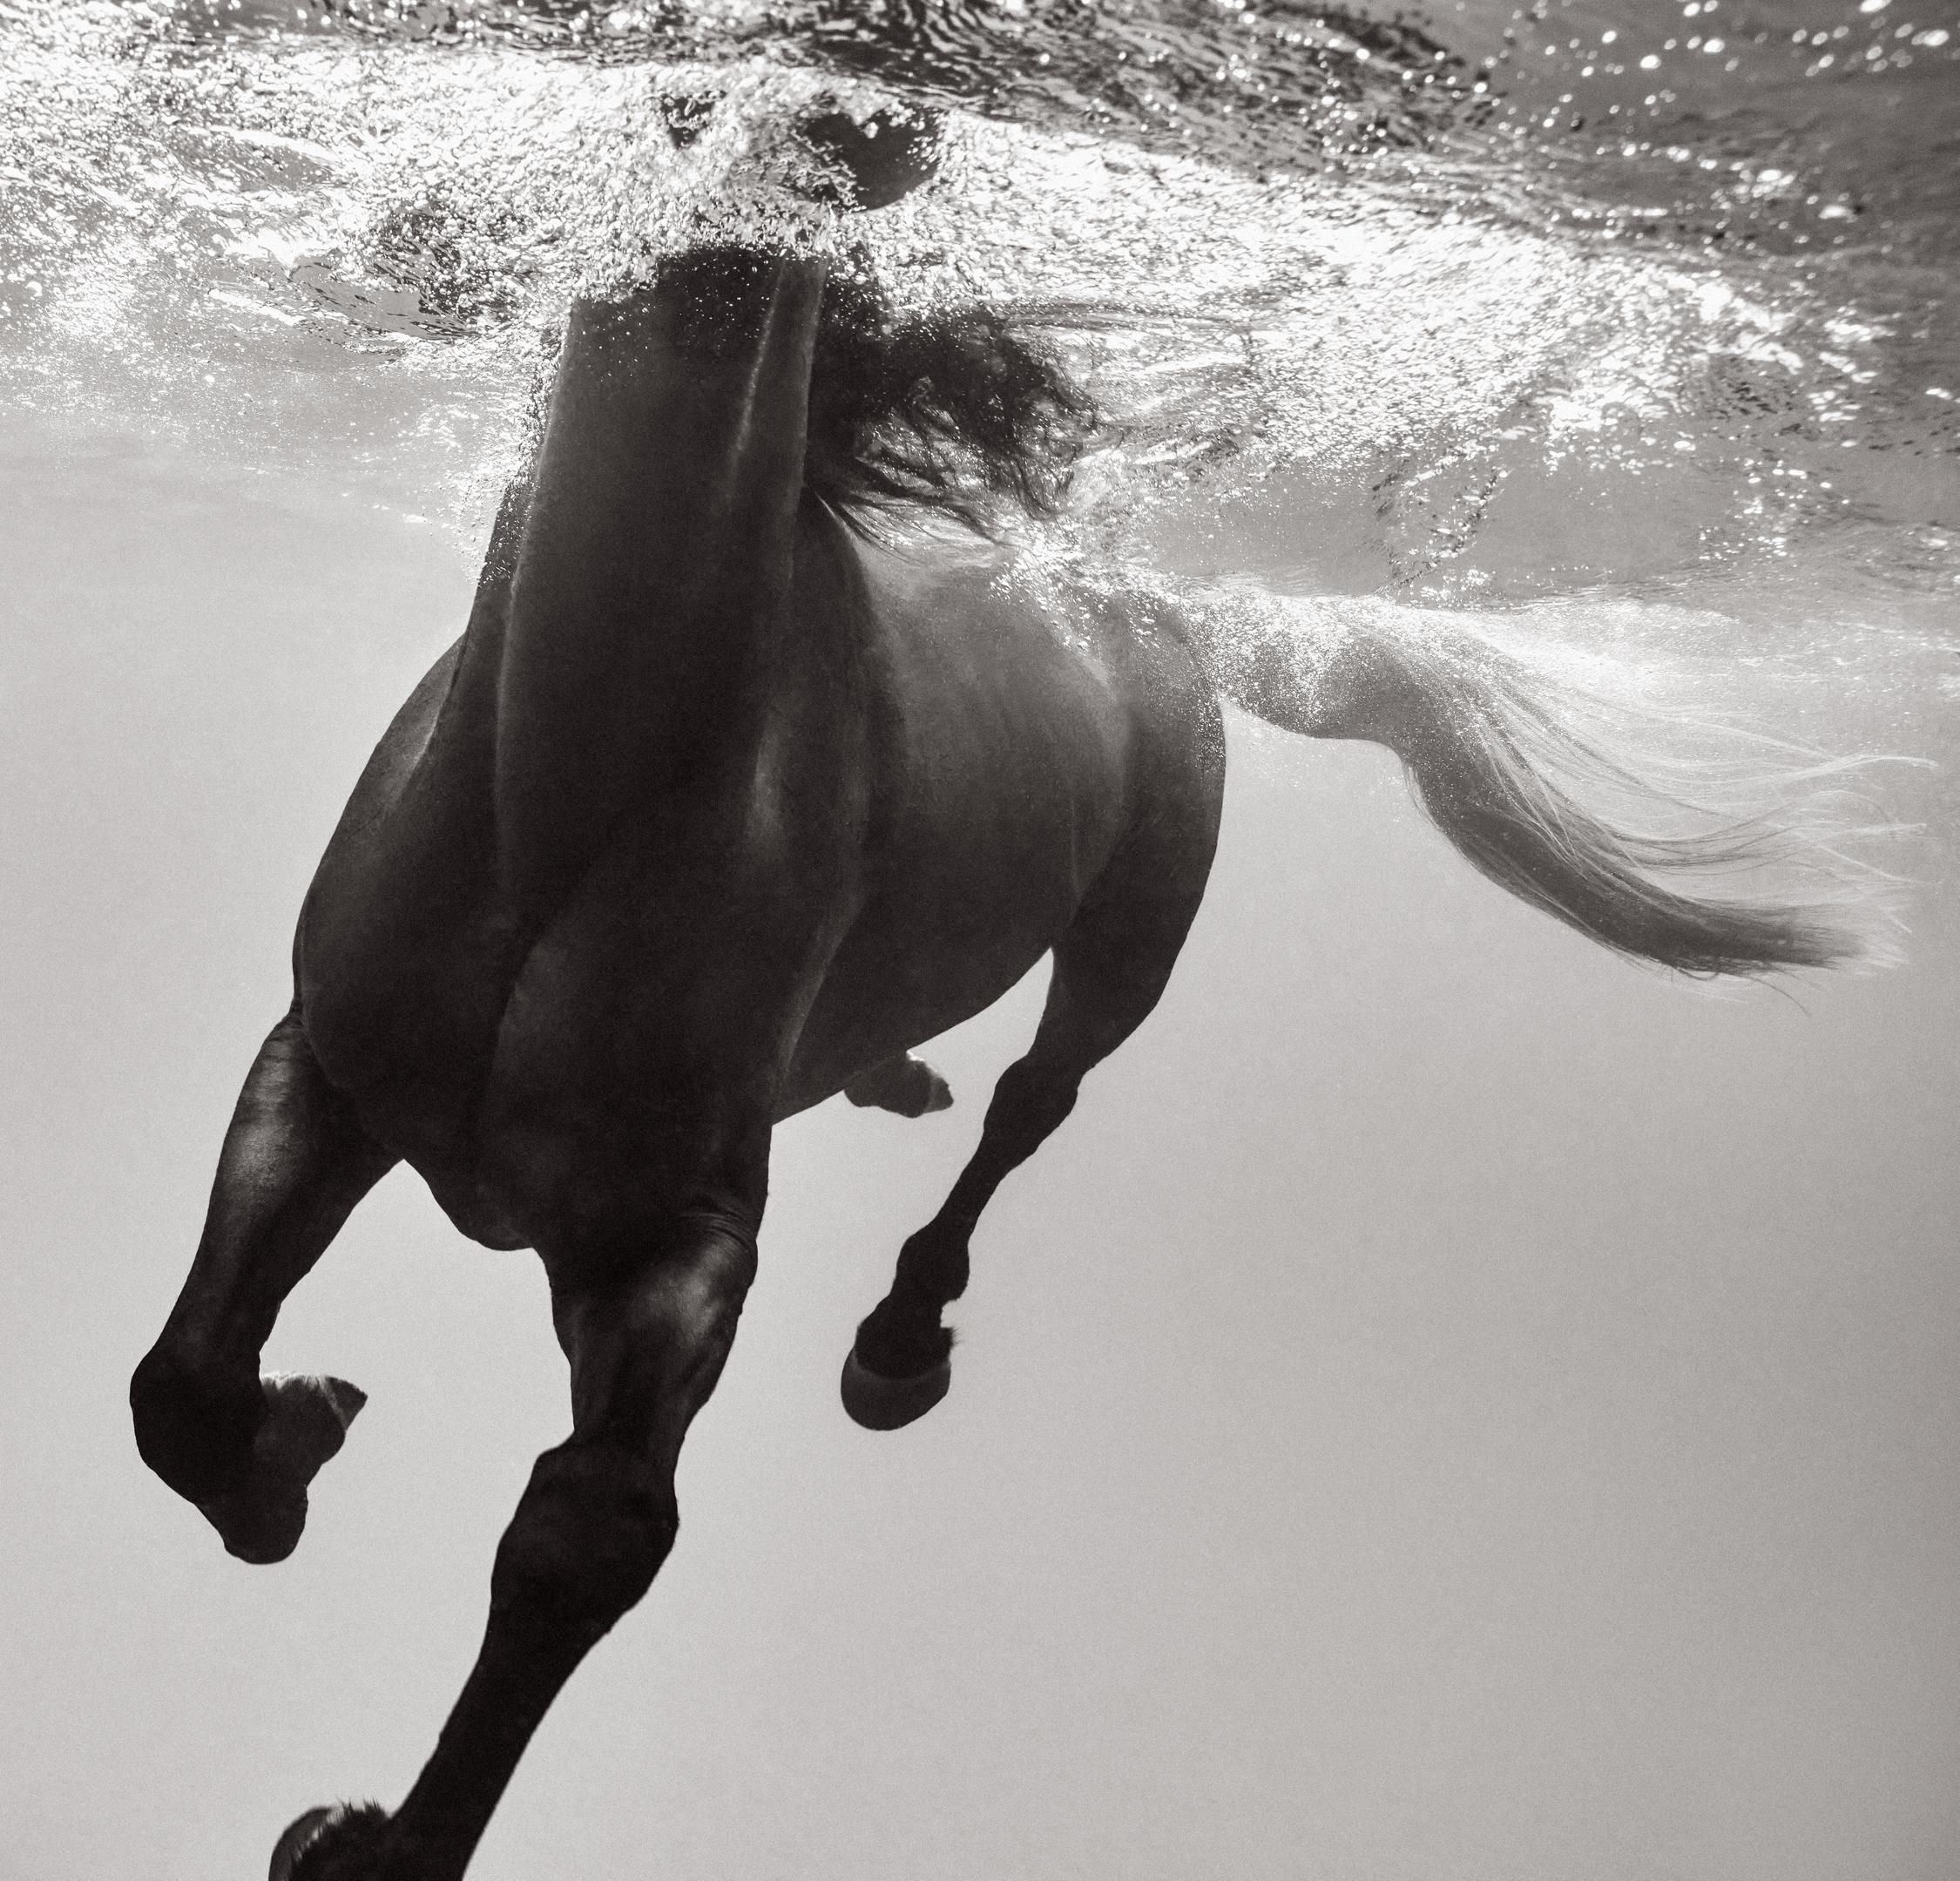 Drew Doggett Black and White Photograph - Intimate Black & White Photograph of a Dark Horse Underwater, Fashion-Inspired